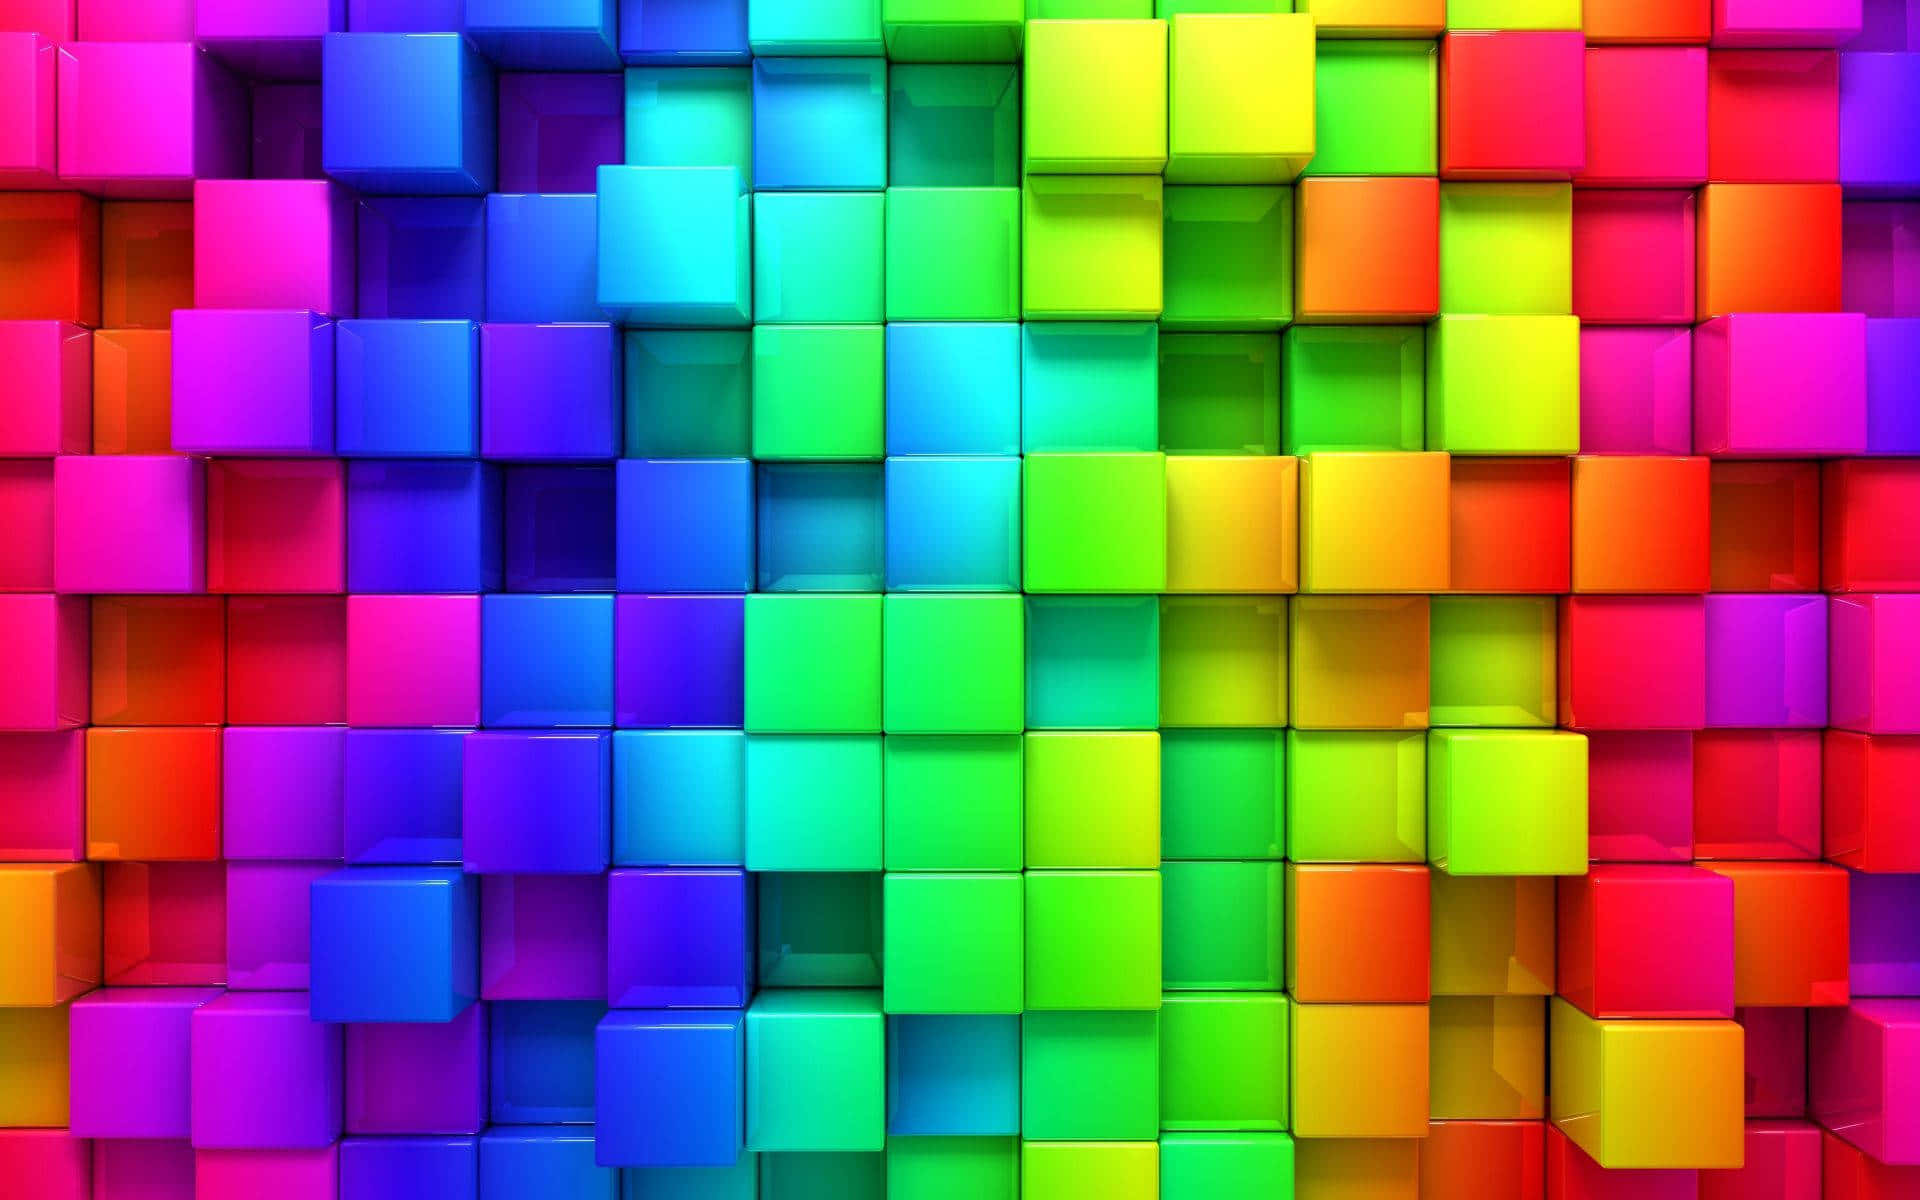 A Colorful Wall Of Cubes